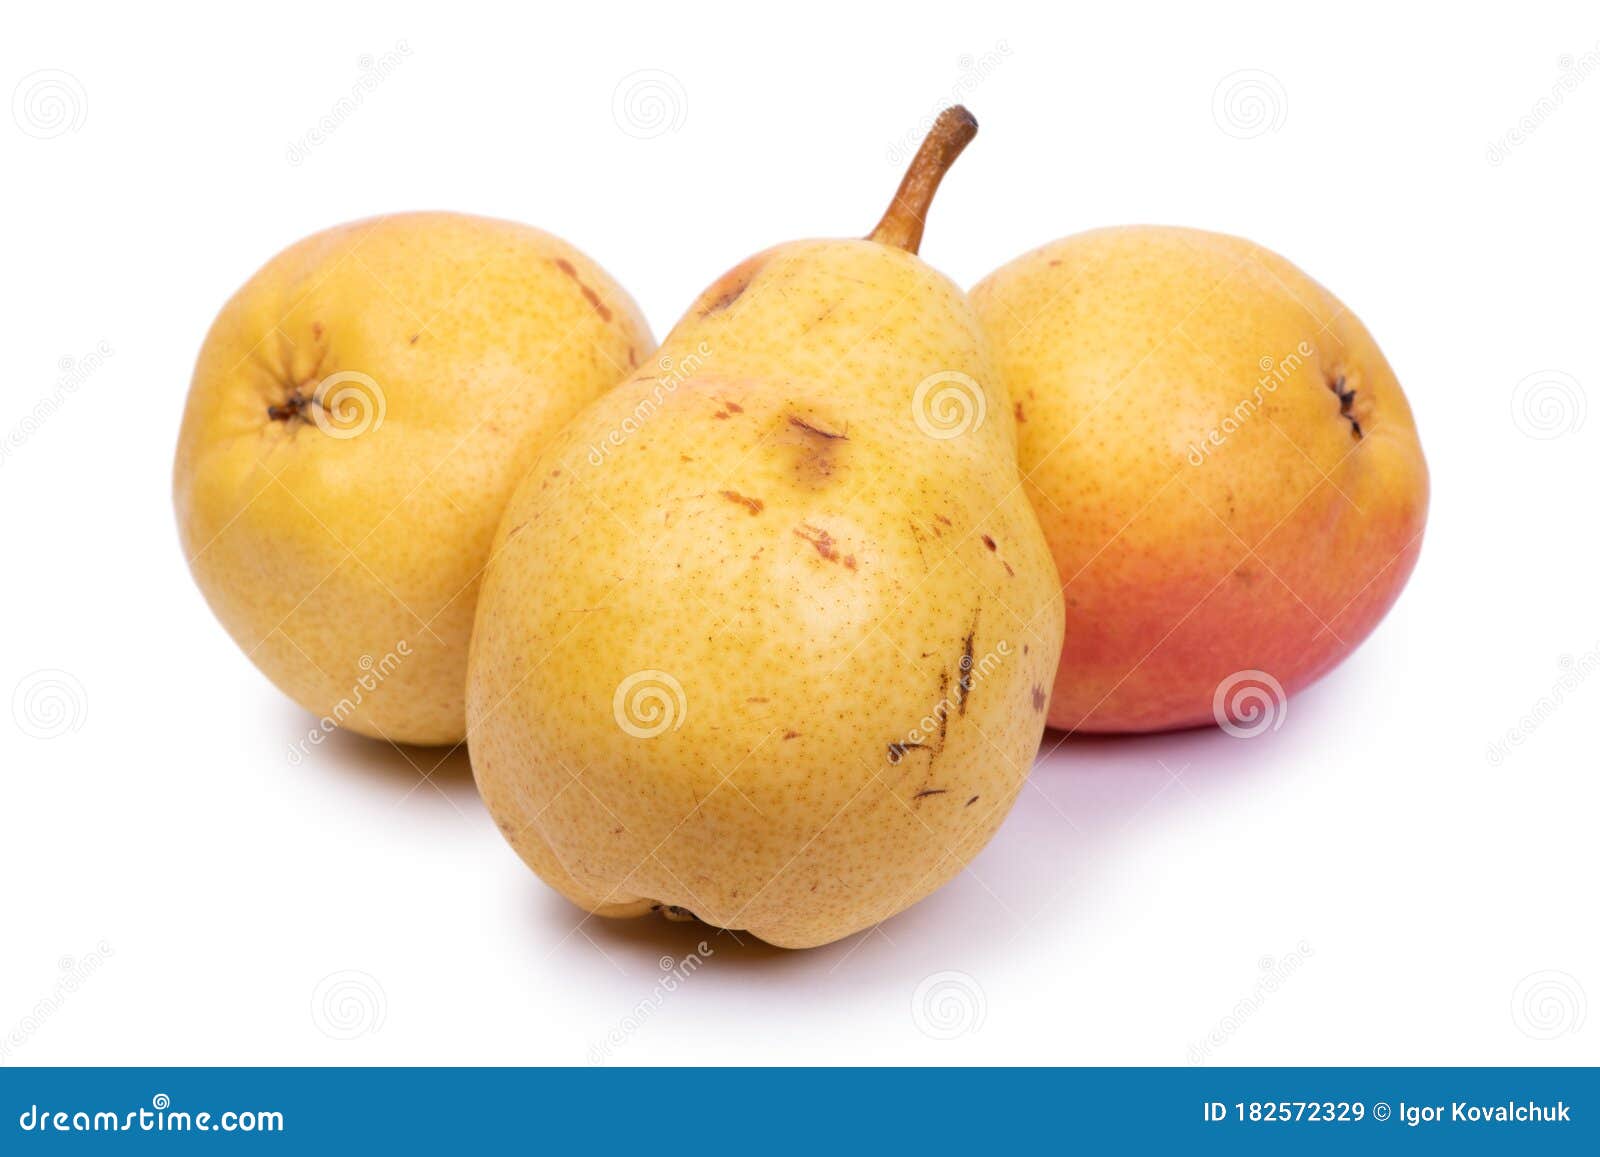 natural ripe flawed pears